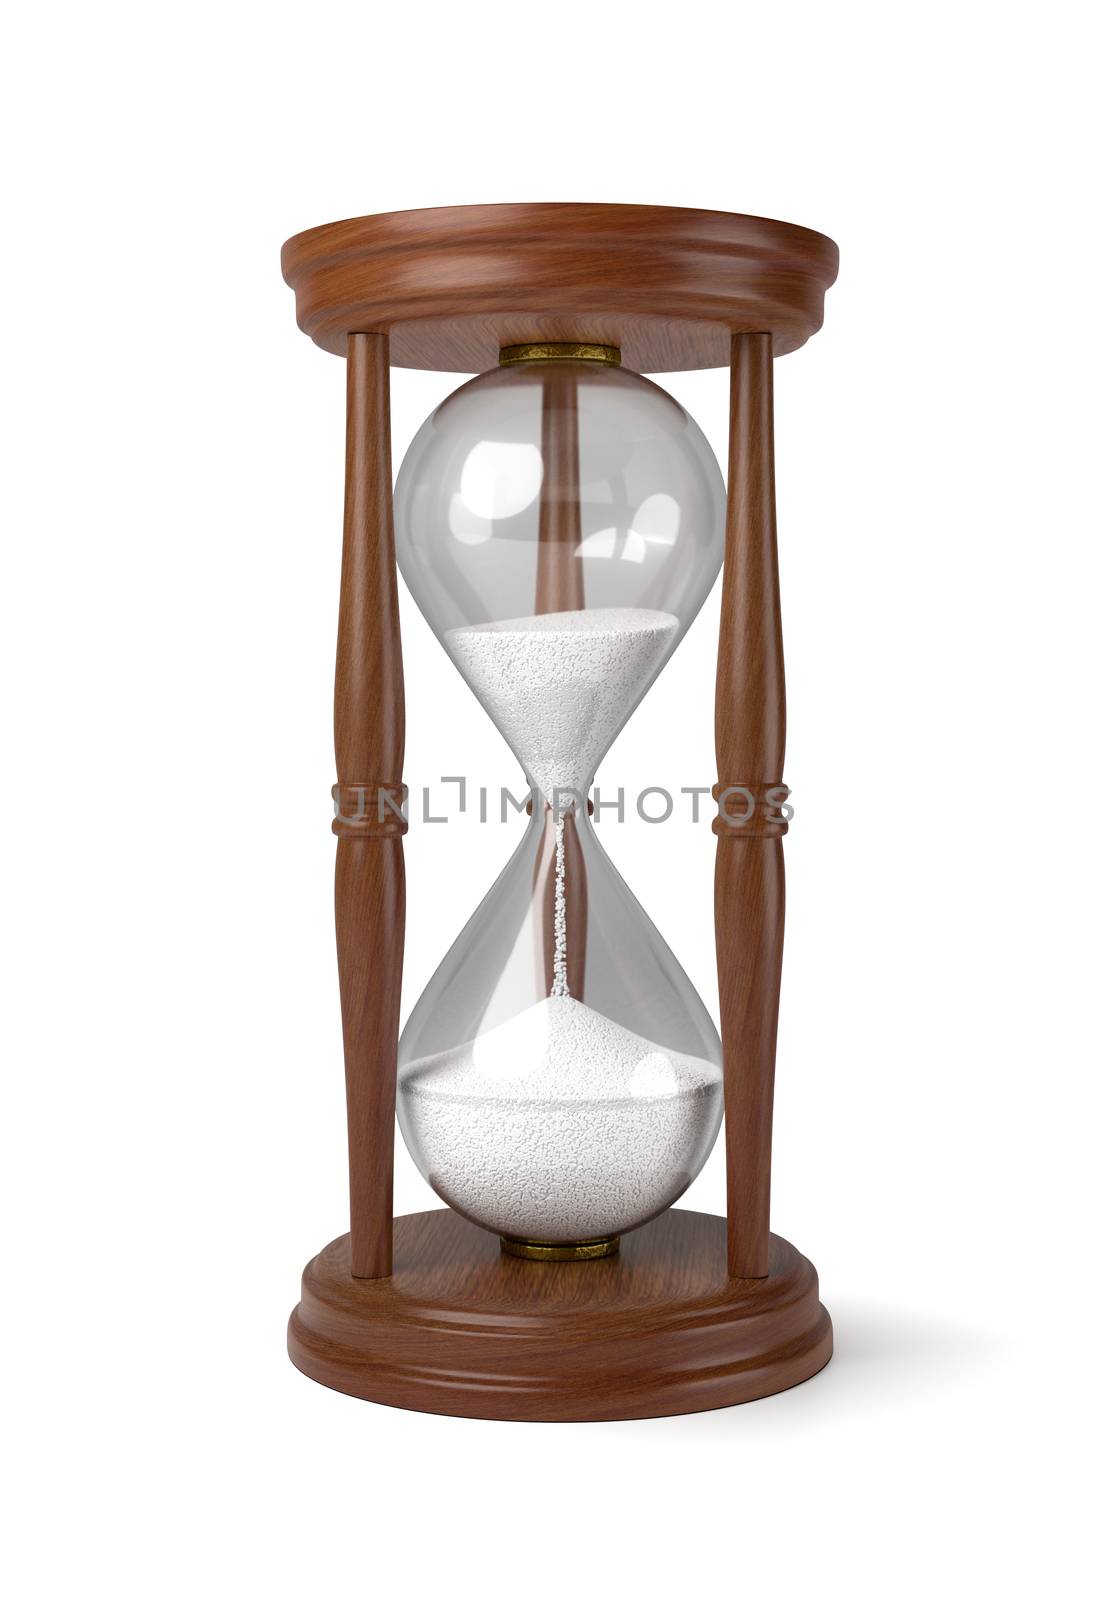 Wooden Hourglass on White Background by make